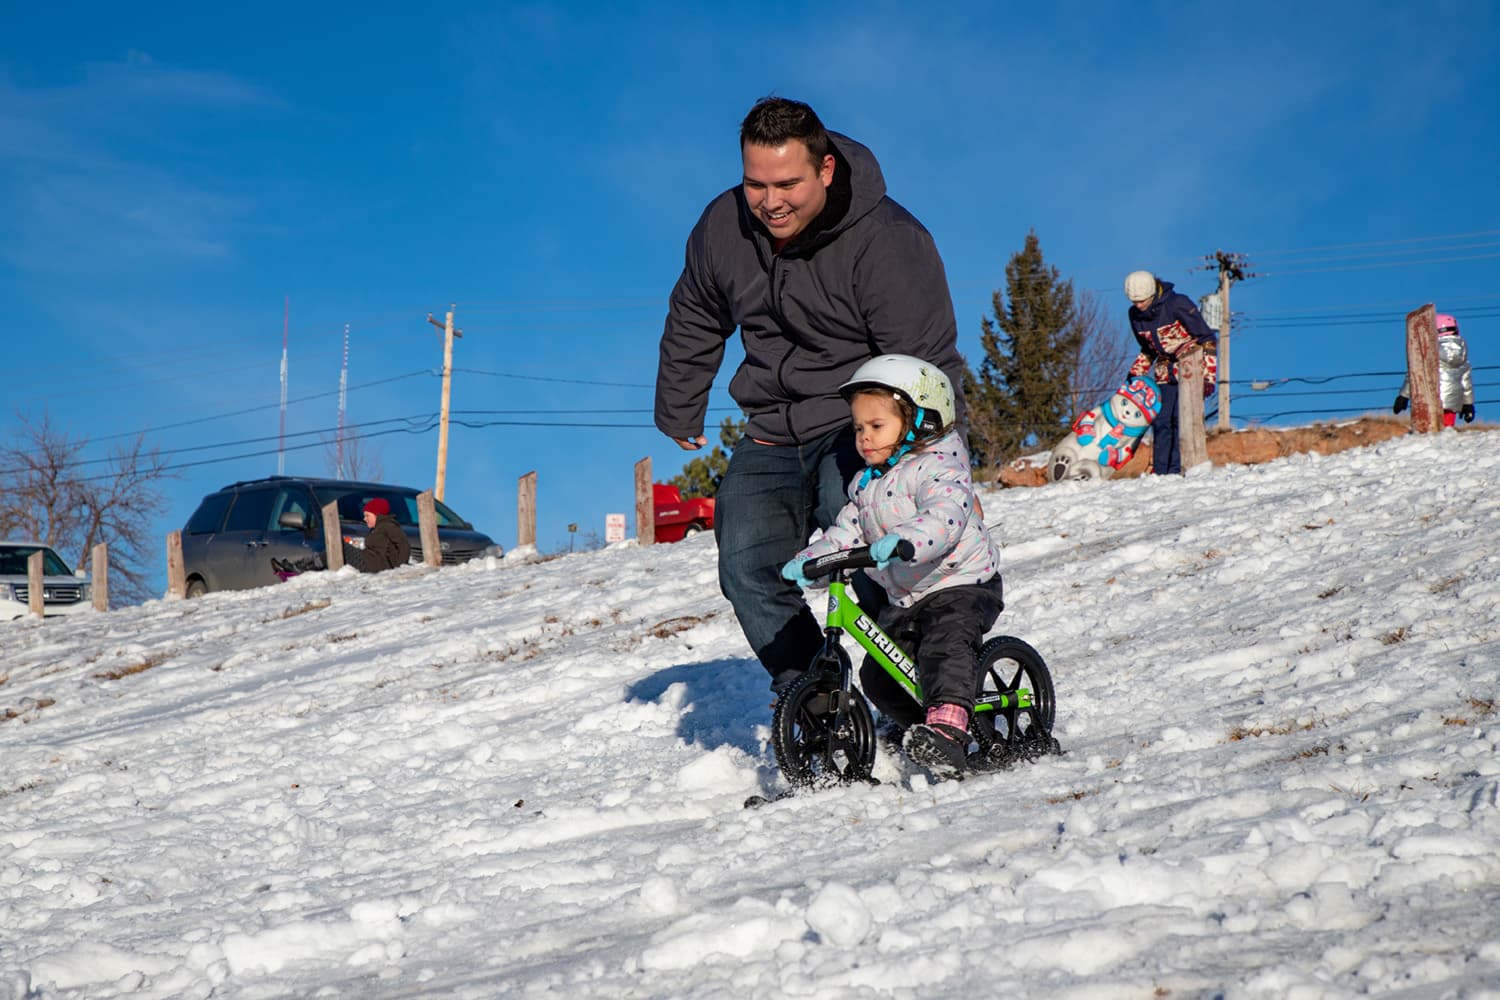 A dad runs alongside his child, who is riding a Strider bike with skis down a snowy hill